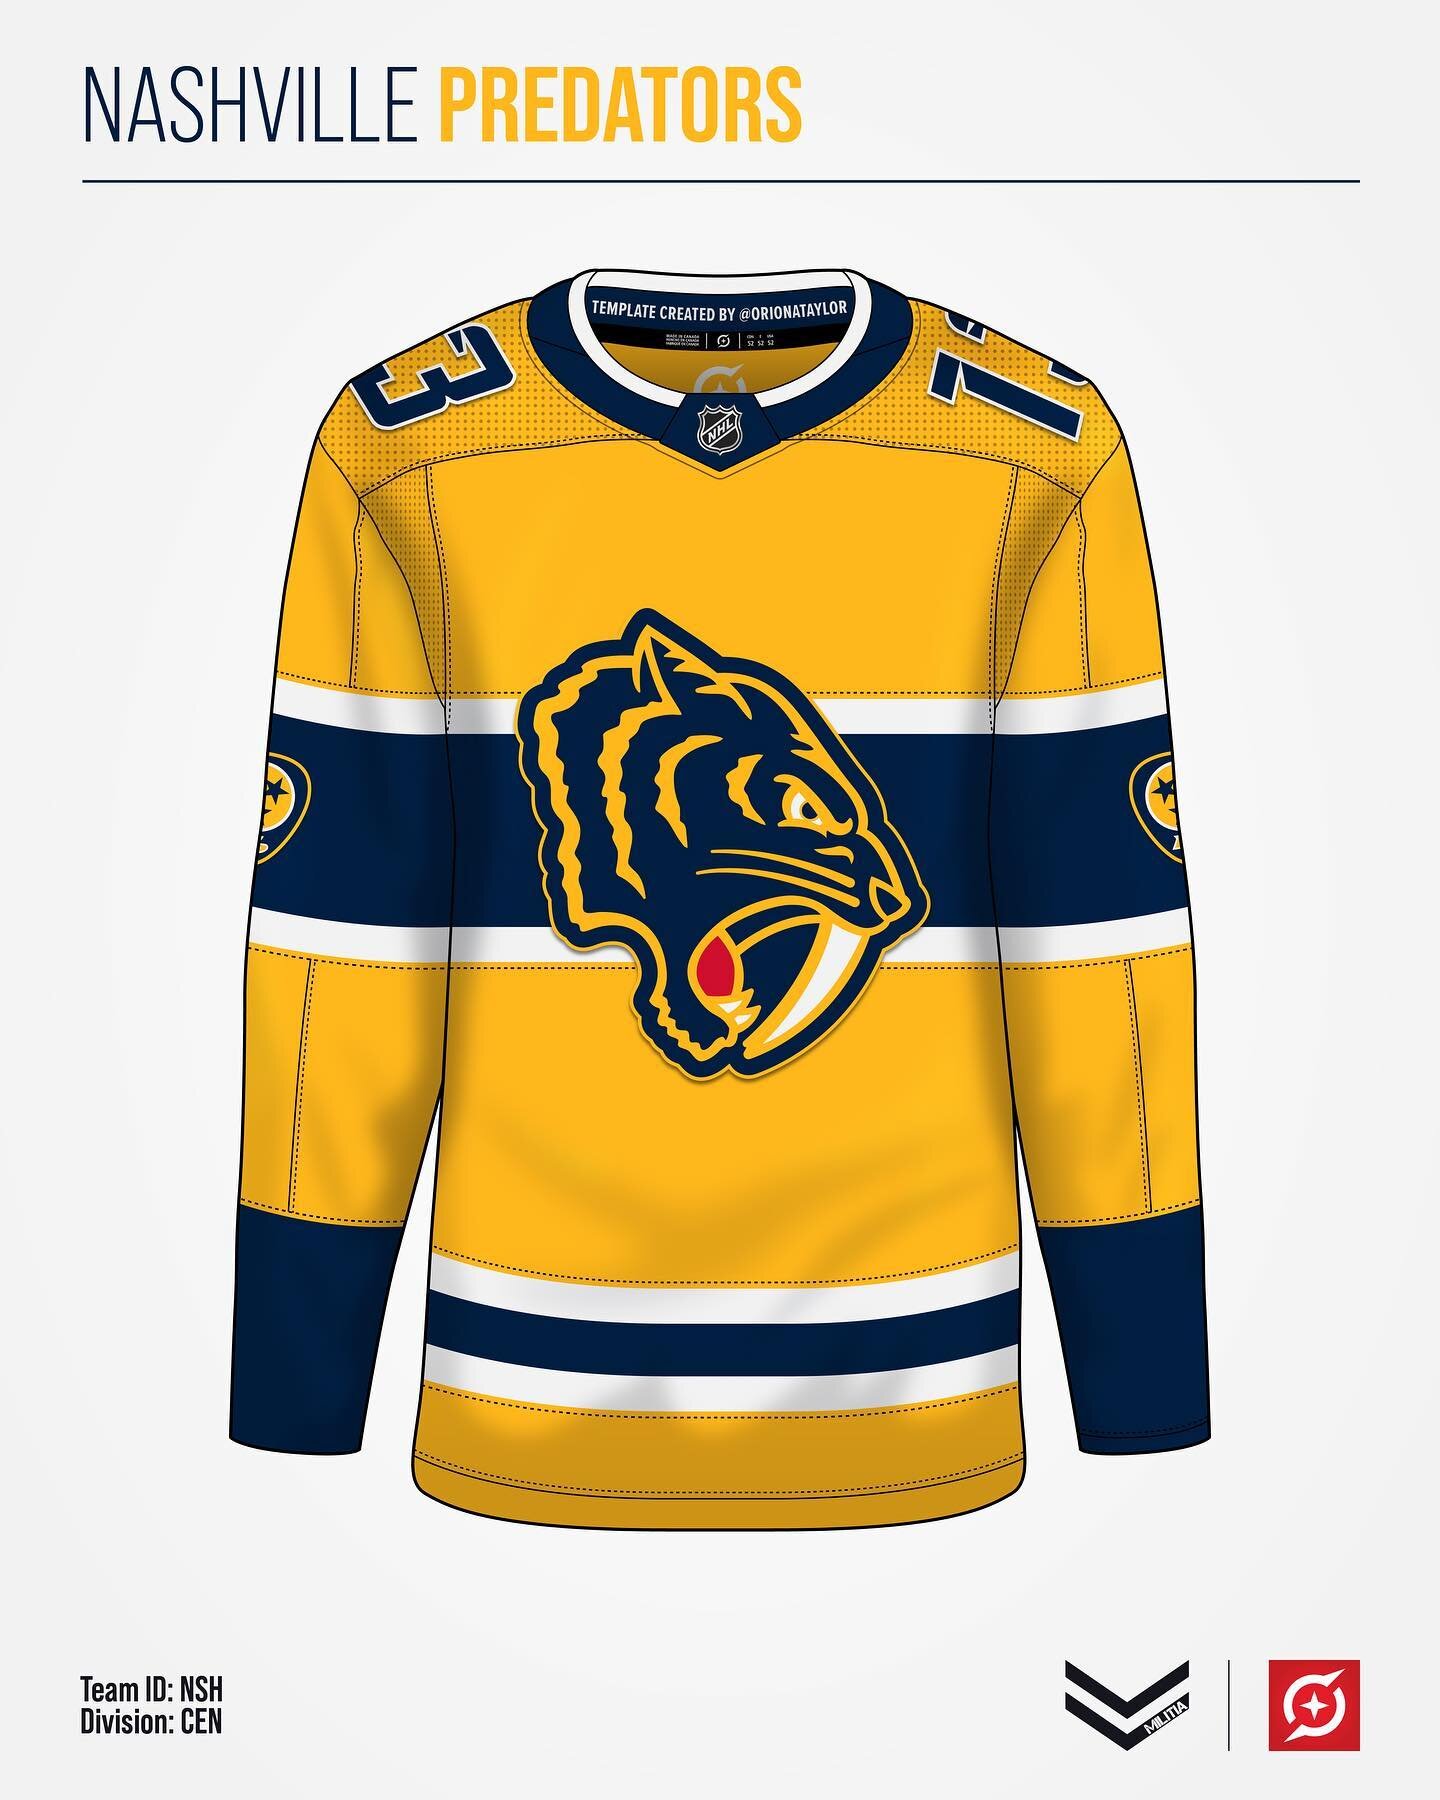 Back again with another #Retromix release after a busy week. Up today is the @predsnhl!  I have mixed feelings about the Preds as they have owned their yellow-gold uniform, but they jerseys have been relatively bland for the past decade. For the home